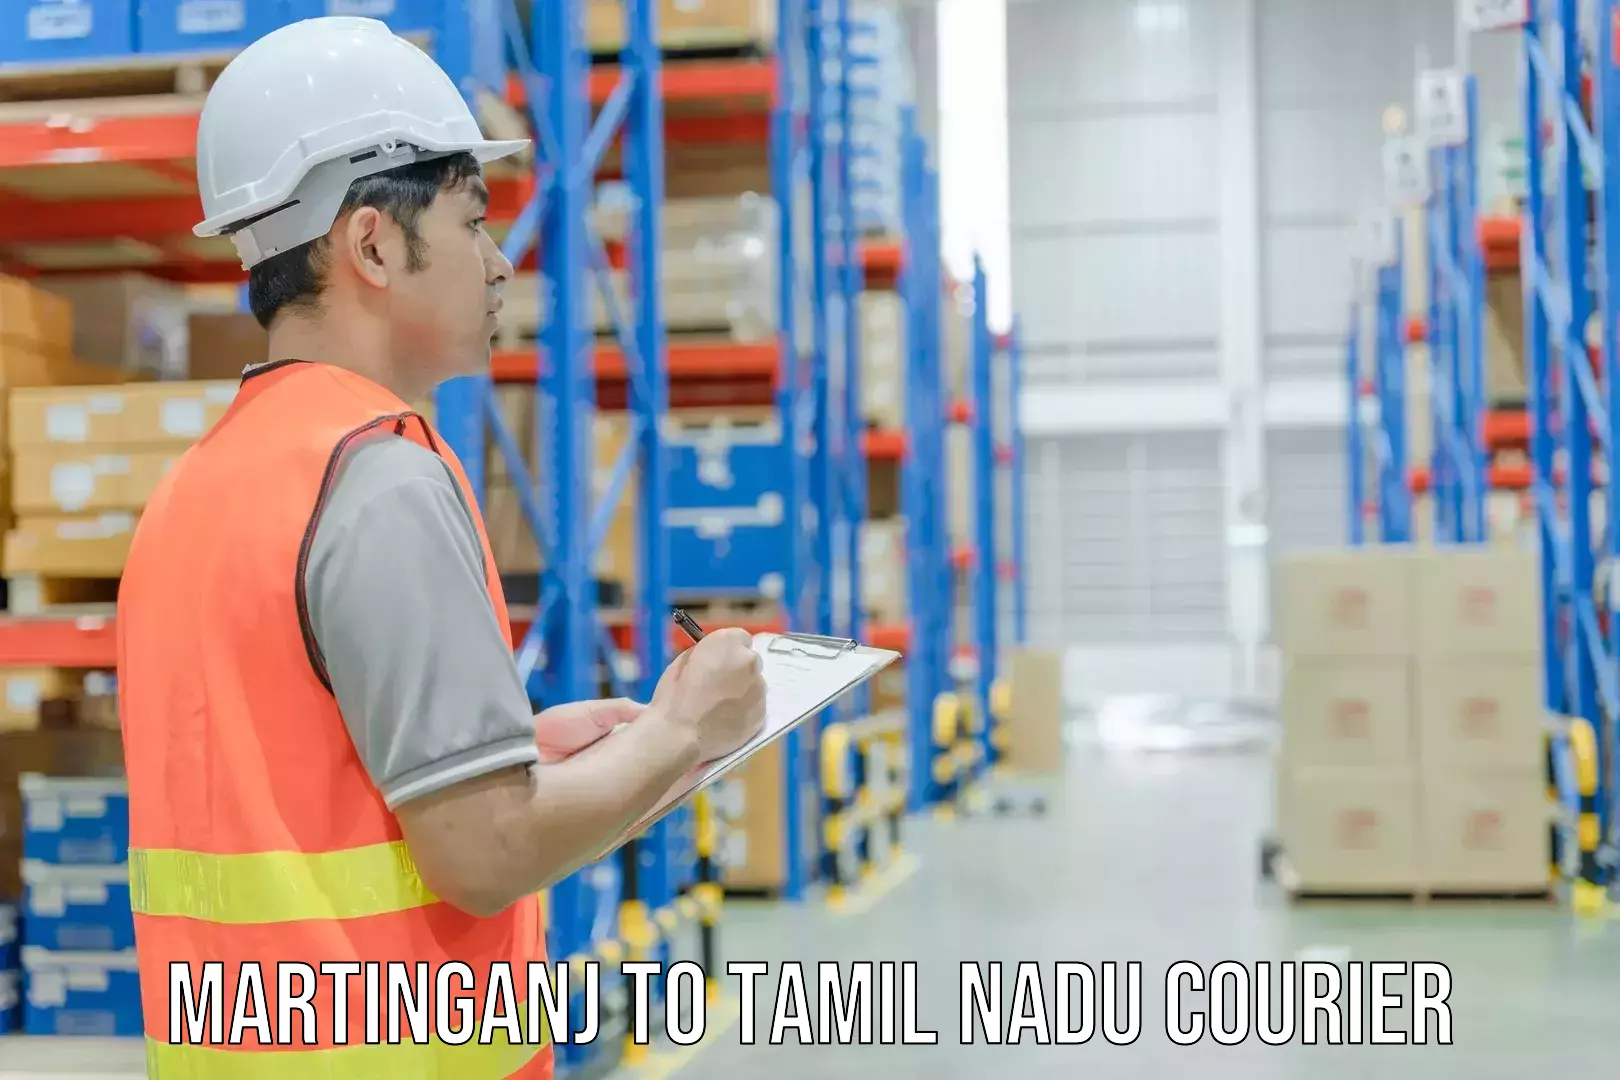 Next-day delivery options Martinganj to Tamil Nadu